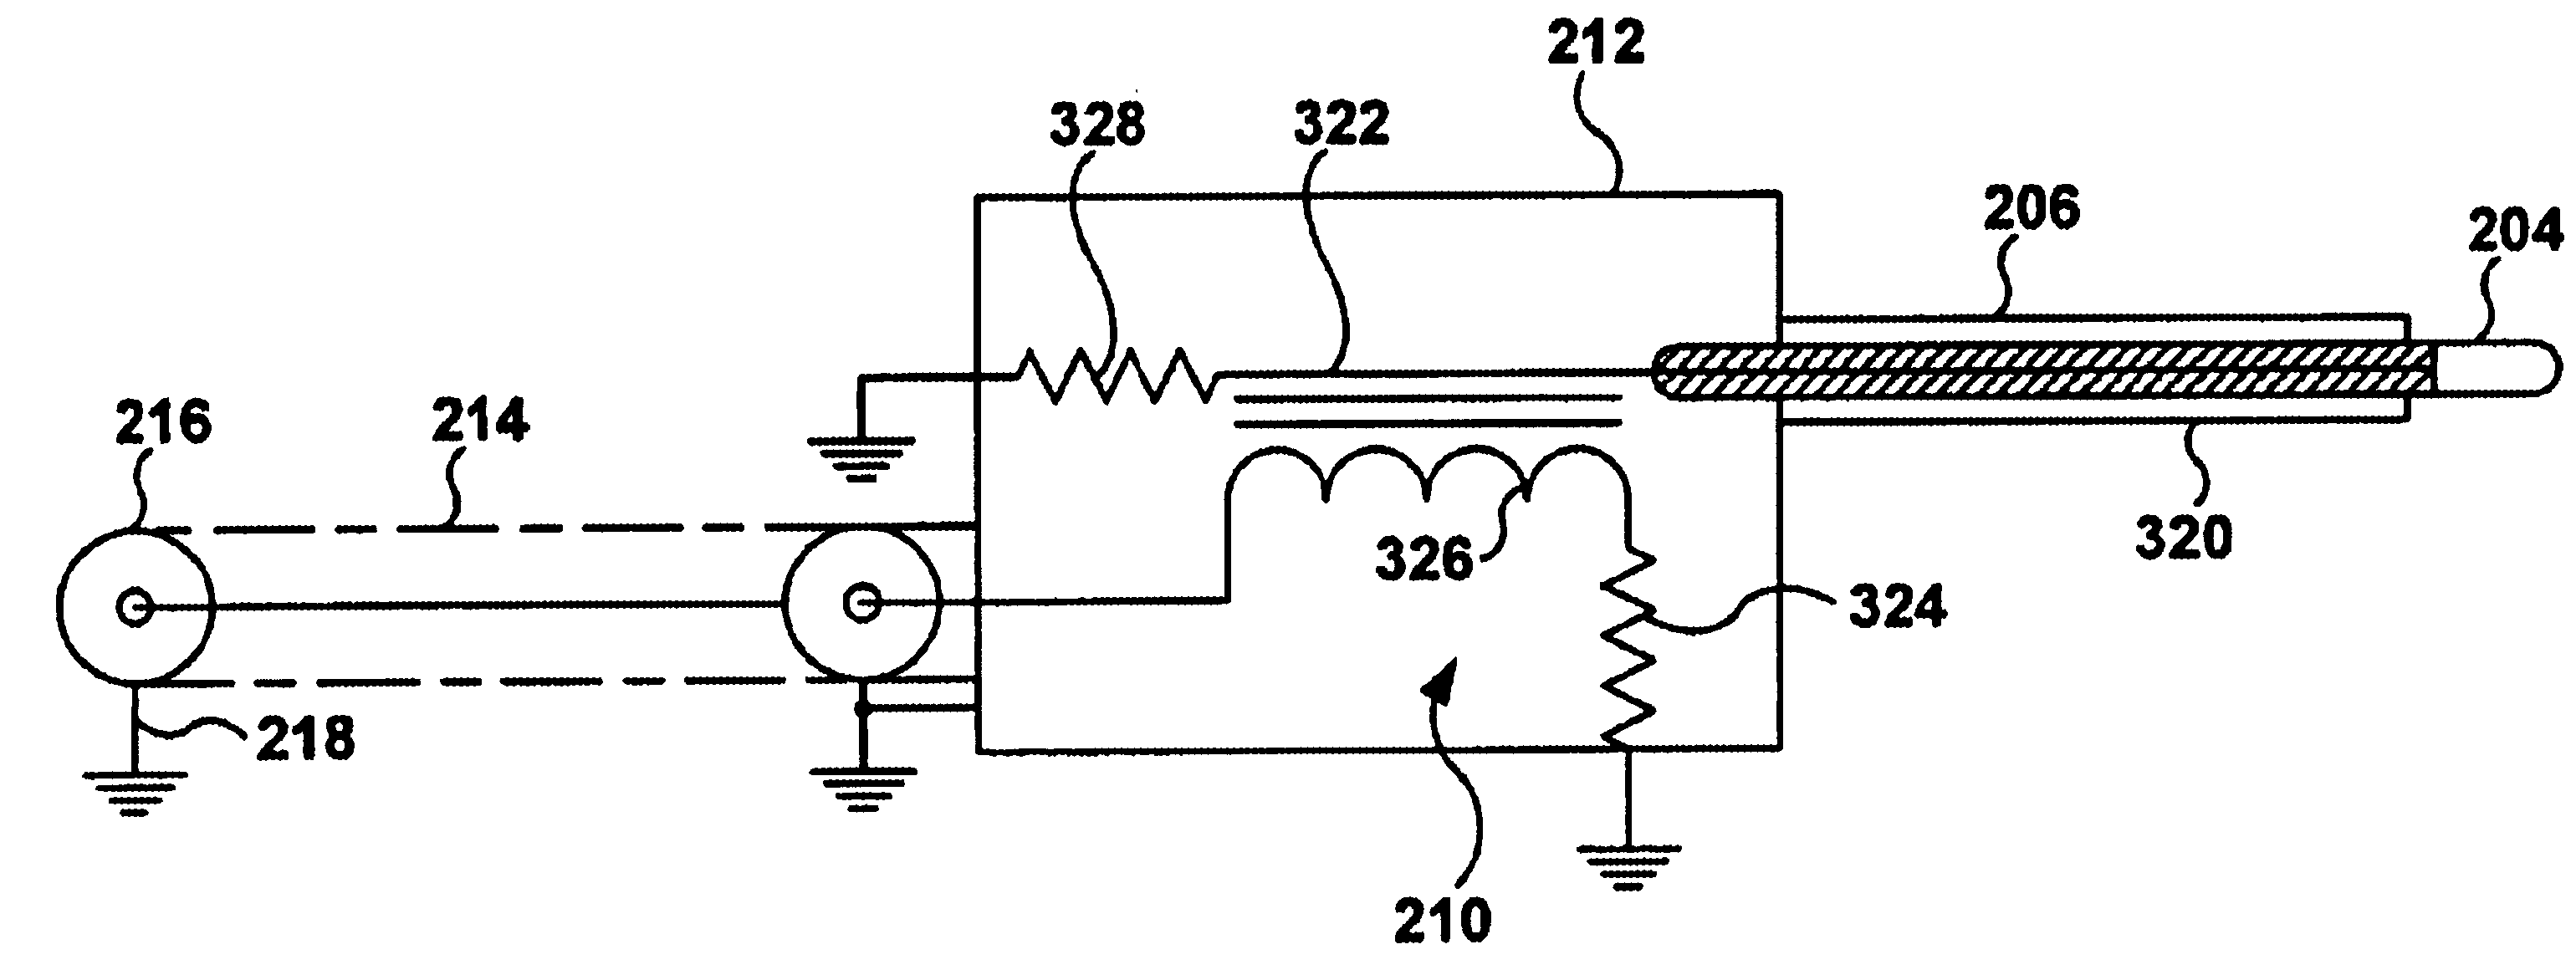 Inductively coupled direct contact test probe